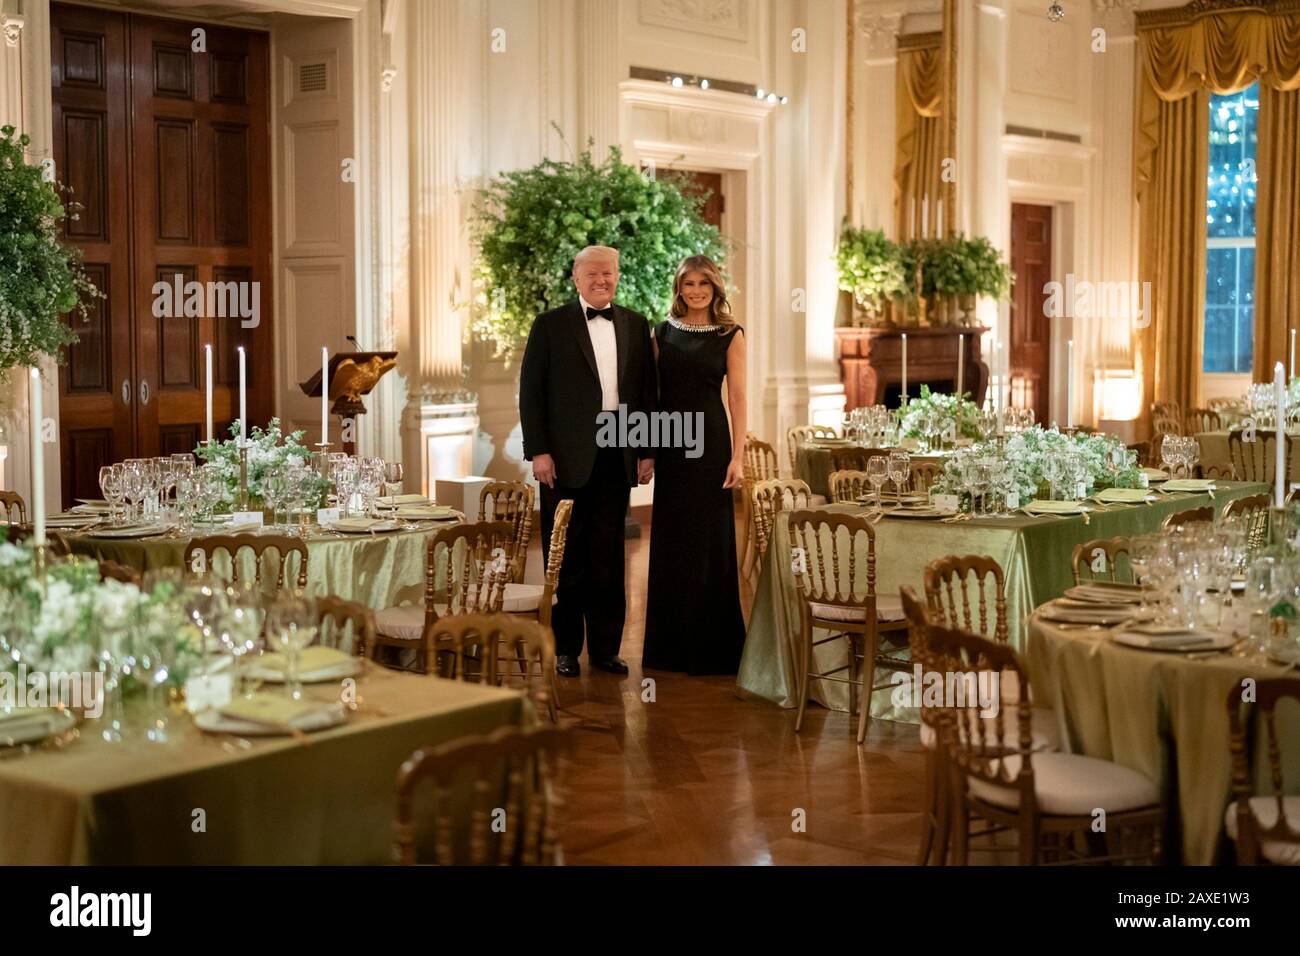 U.S President Donald Trump and First Lady Melania Trump pose together for a portrait prior to the Governors Ball in the East Room of the White House February 9, 2020 in Washington, DC. Stock Photo